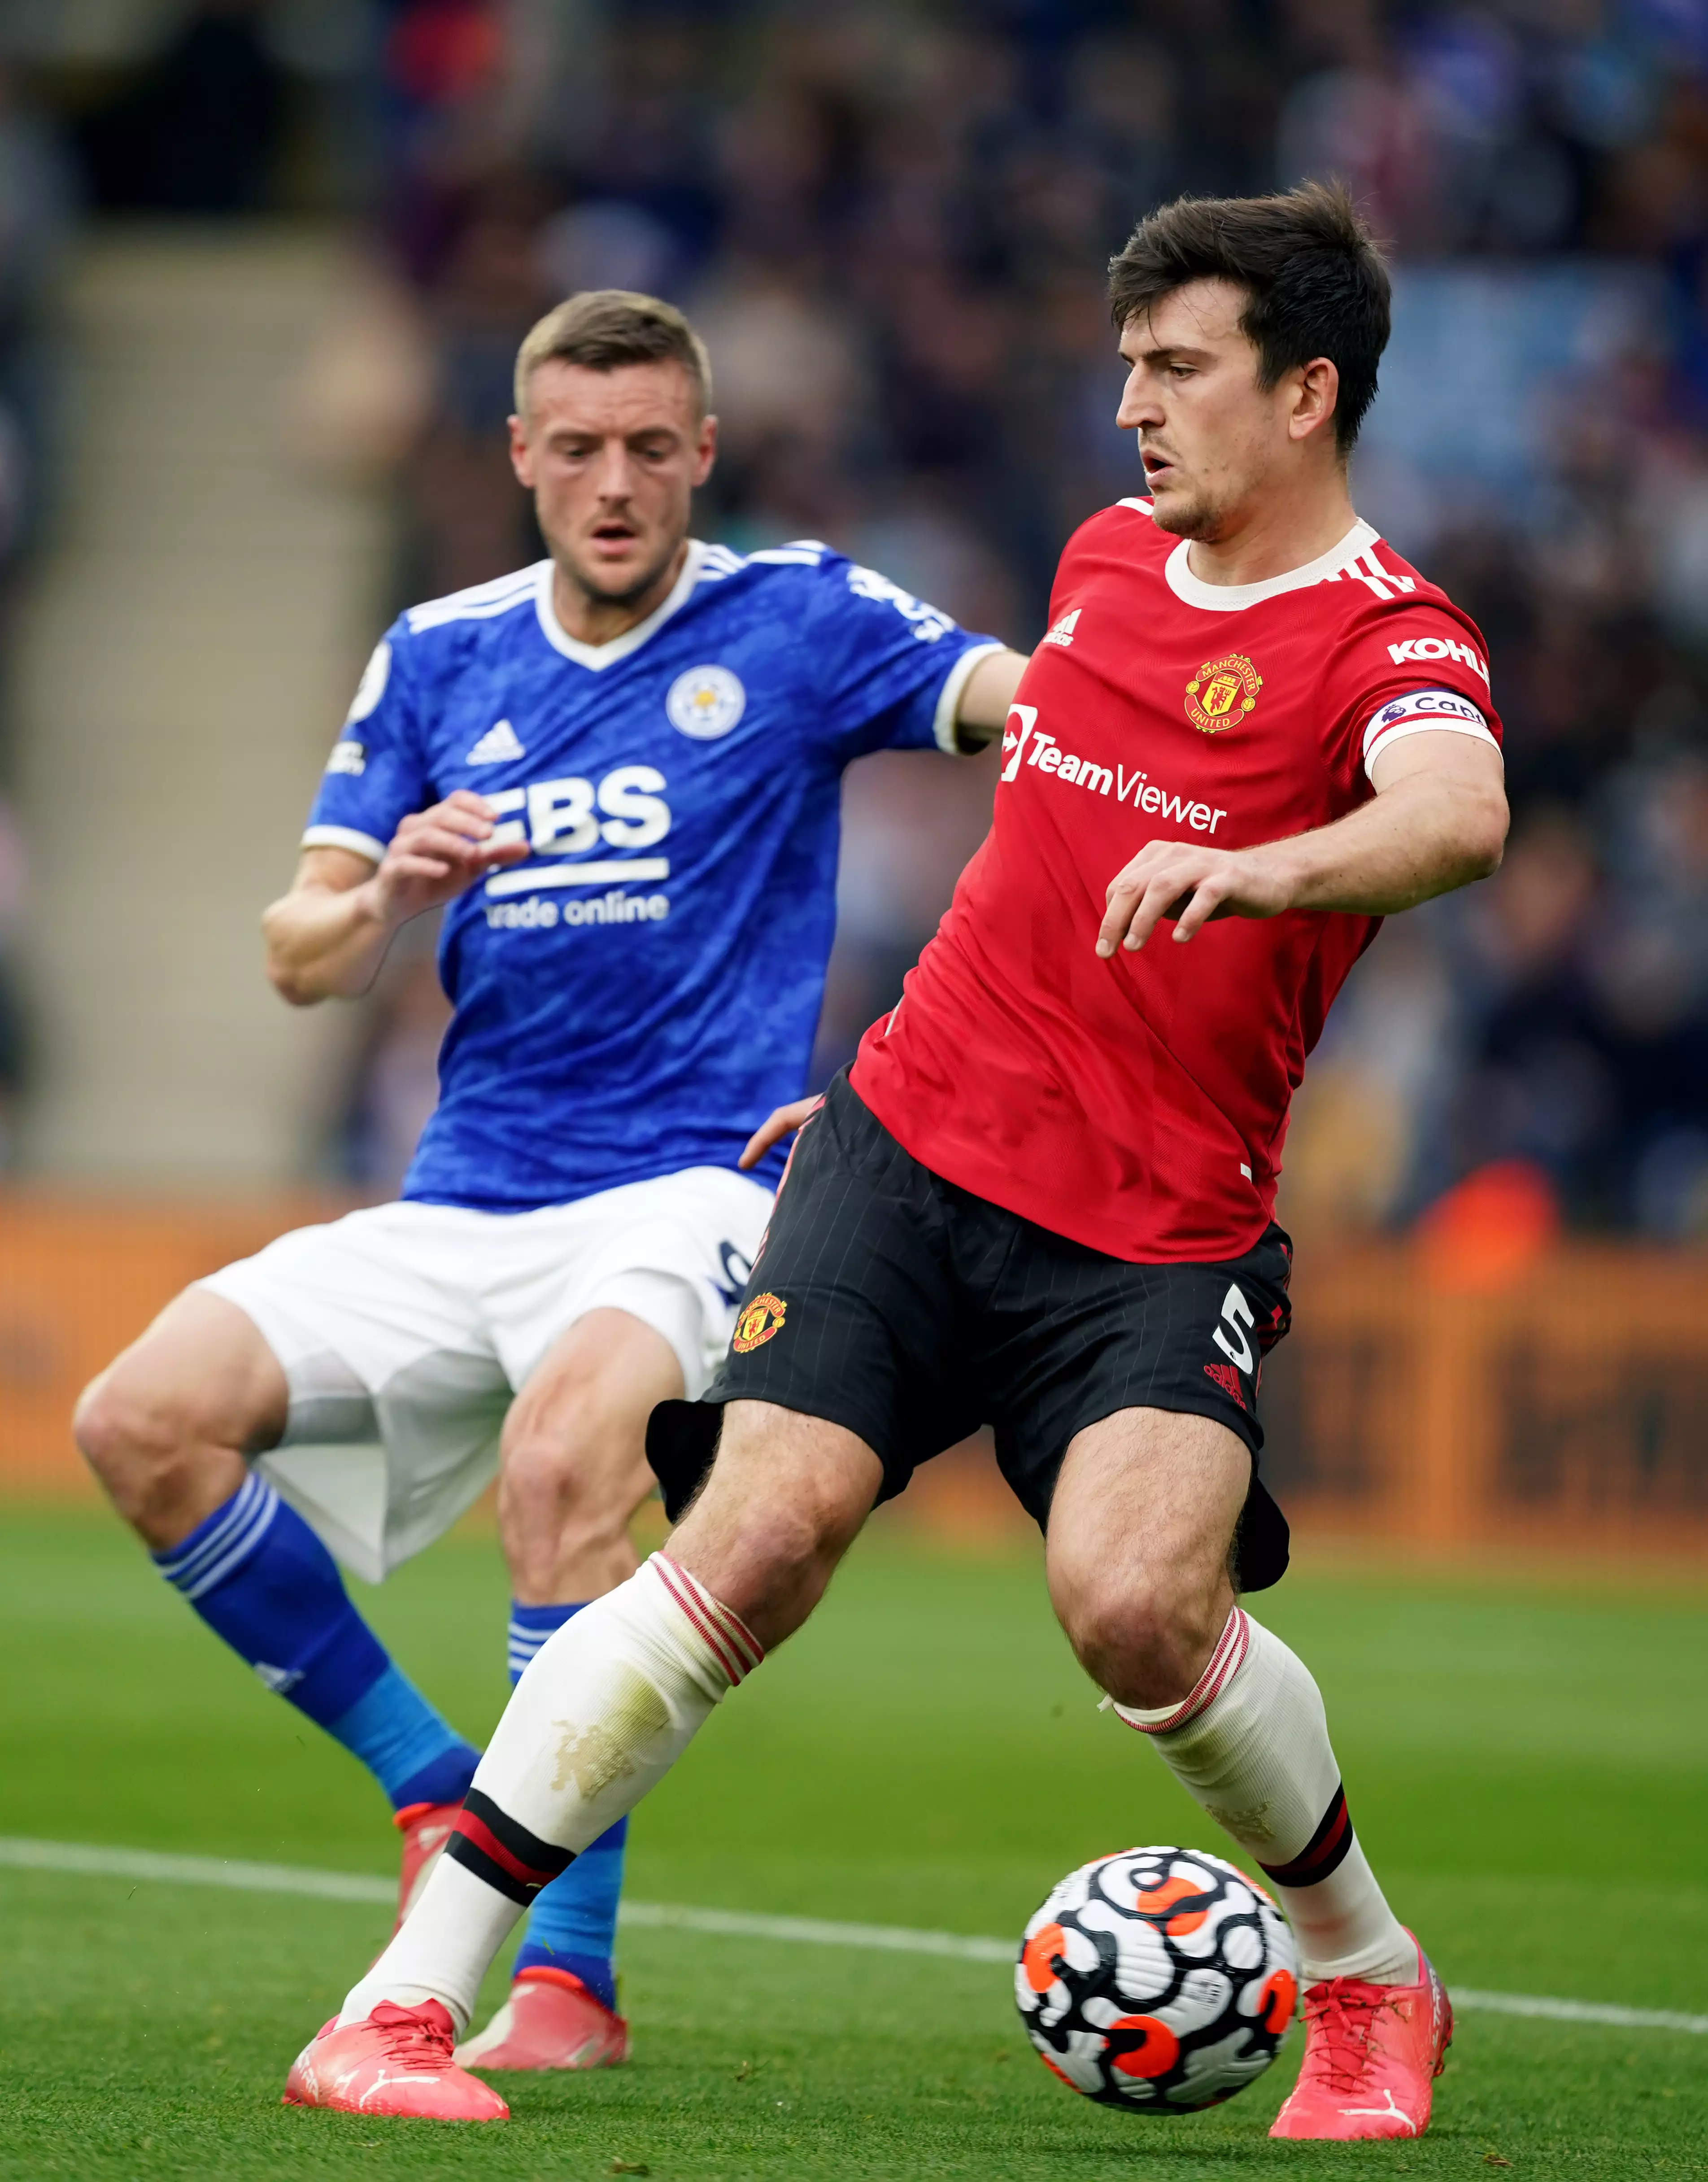 PA: Harry Maguire endured a torrid time in Manchester United's 4-2 defeat to Leicester City.